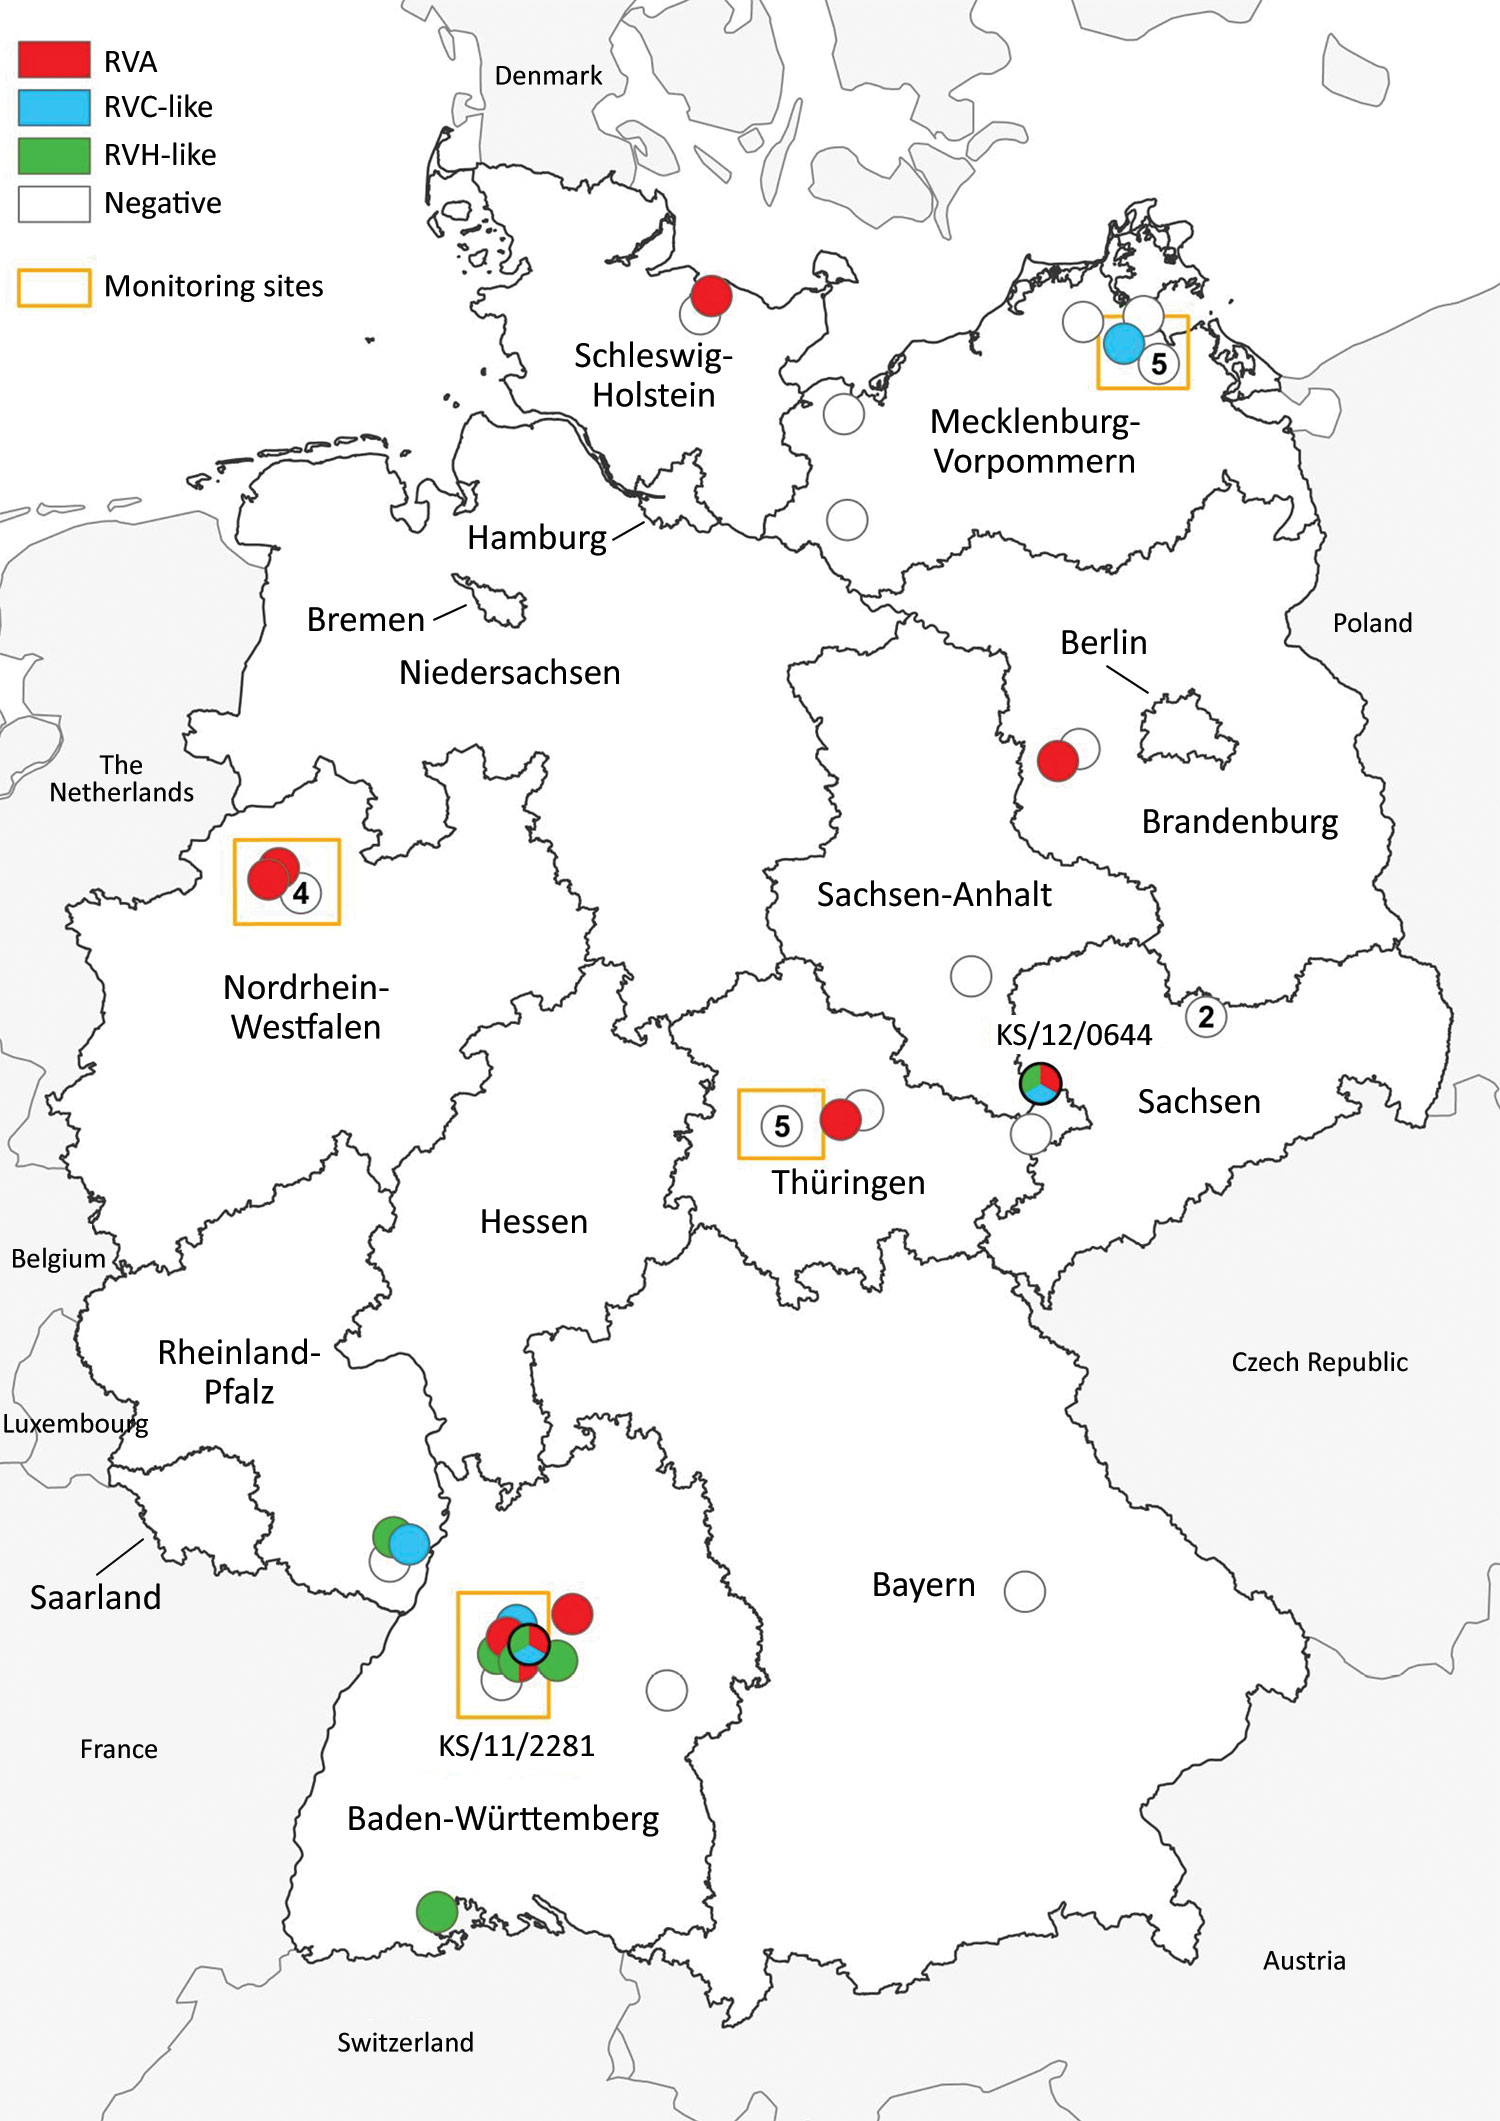 Distribution of common shrews (Sorex araneus) collected at monitoring sites (9) and additional sites (10) in Germany, 2004–2014, positive and negative for RVA, RVC-like, and RVH-like species by reverse transcription PCR. Numbers in white circles indicate the number of negative samples at that collection site; white circles without numbers indicate 1 negative sample at that site. Circles with multiple colors indicate animals with co-infections. The collection sites of the 2 samples analyzed in de